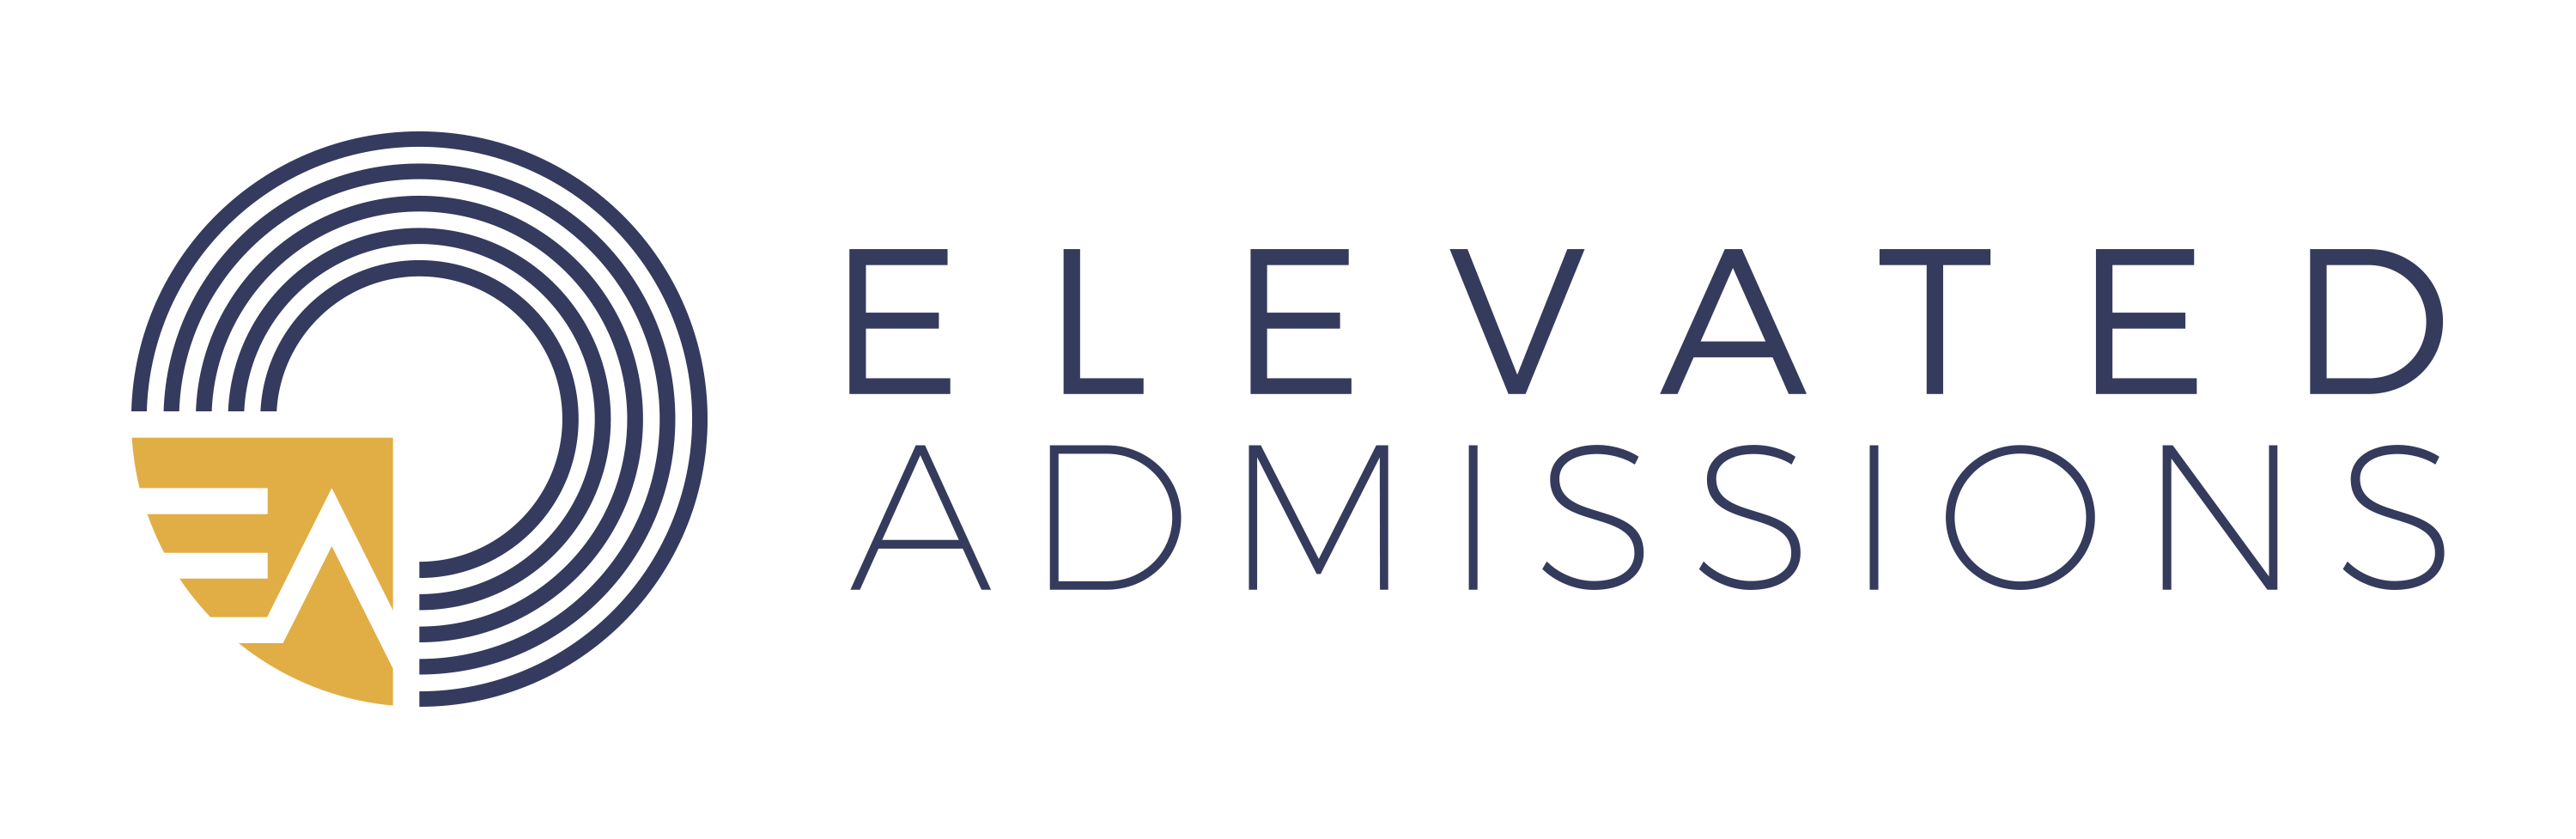 Elevated Admissions